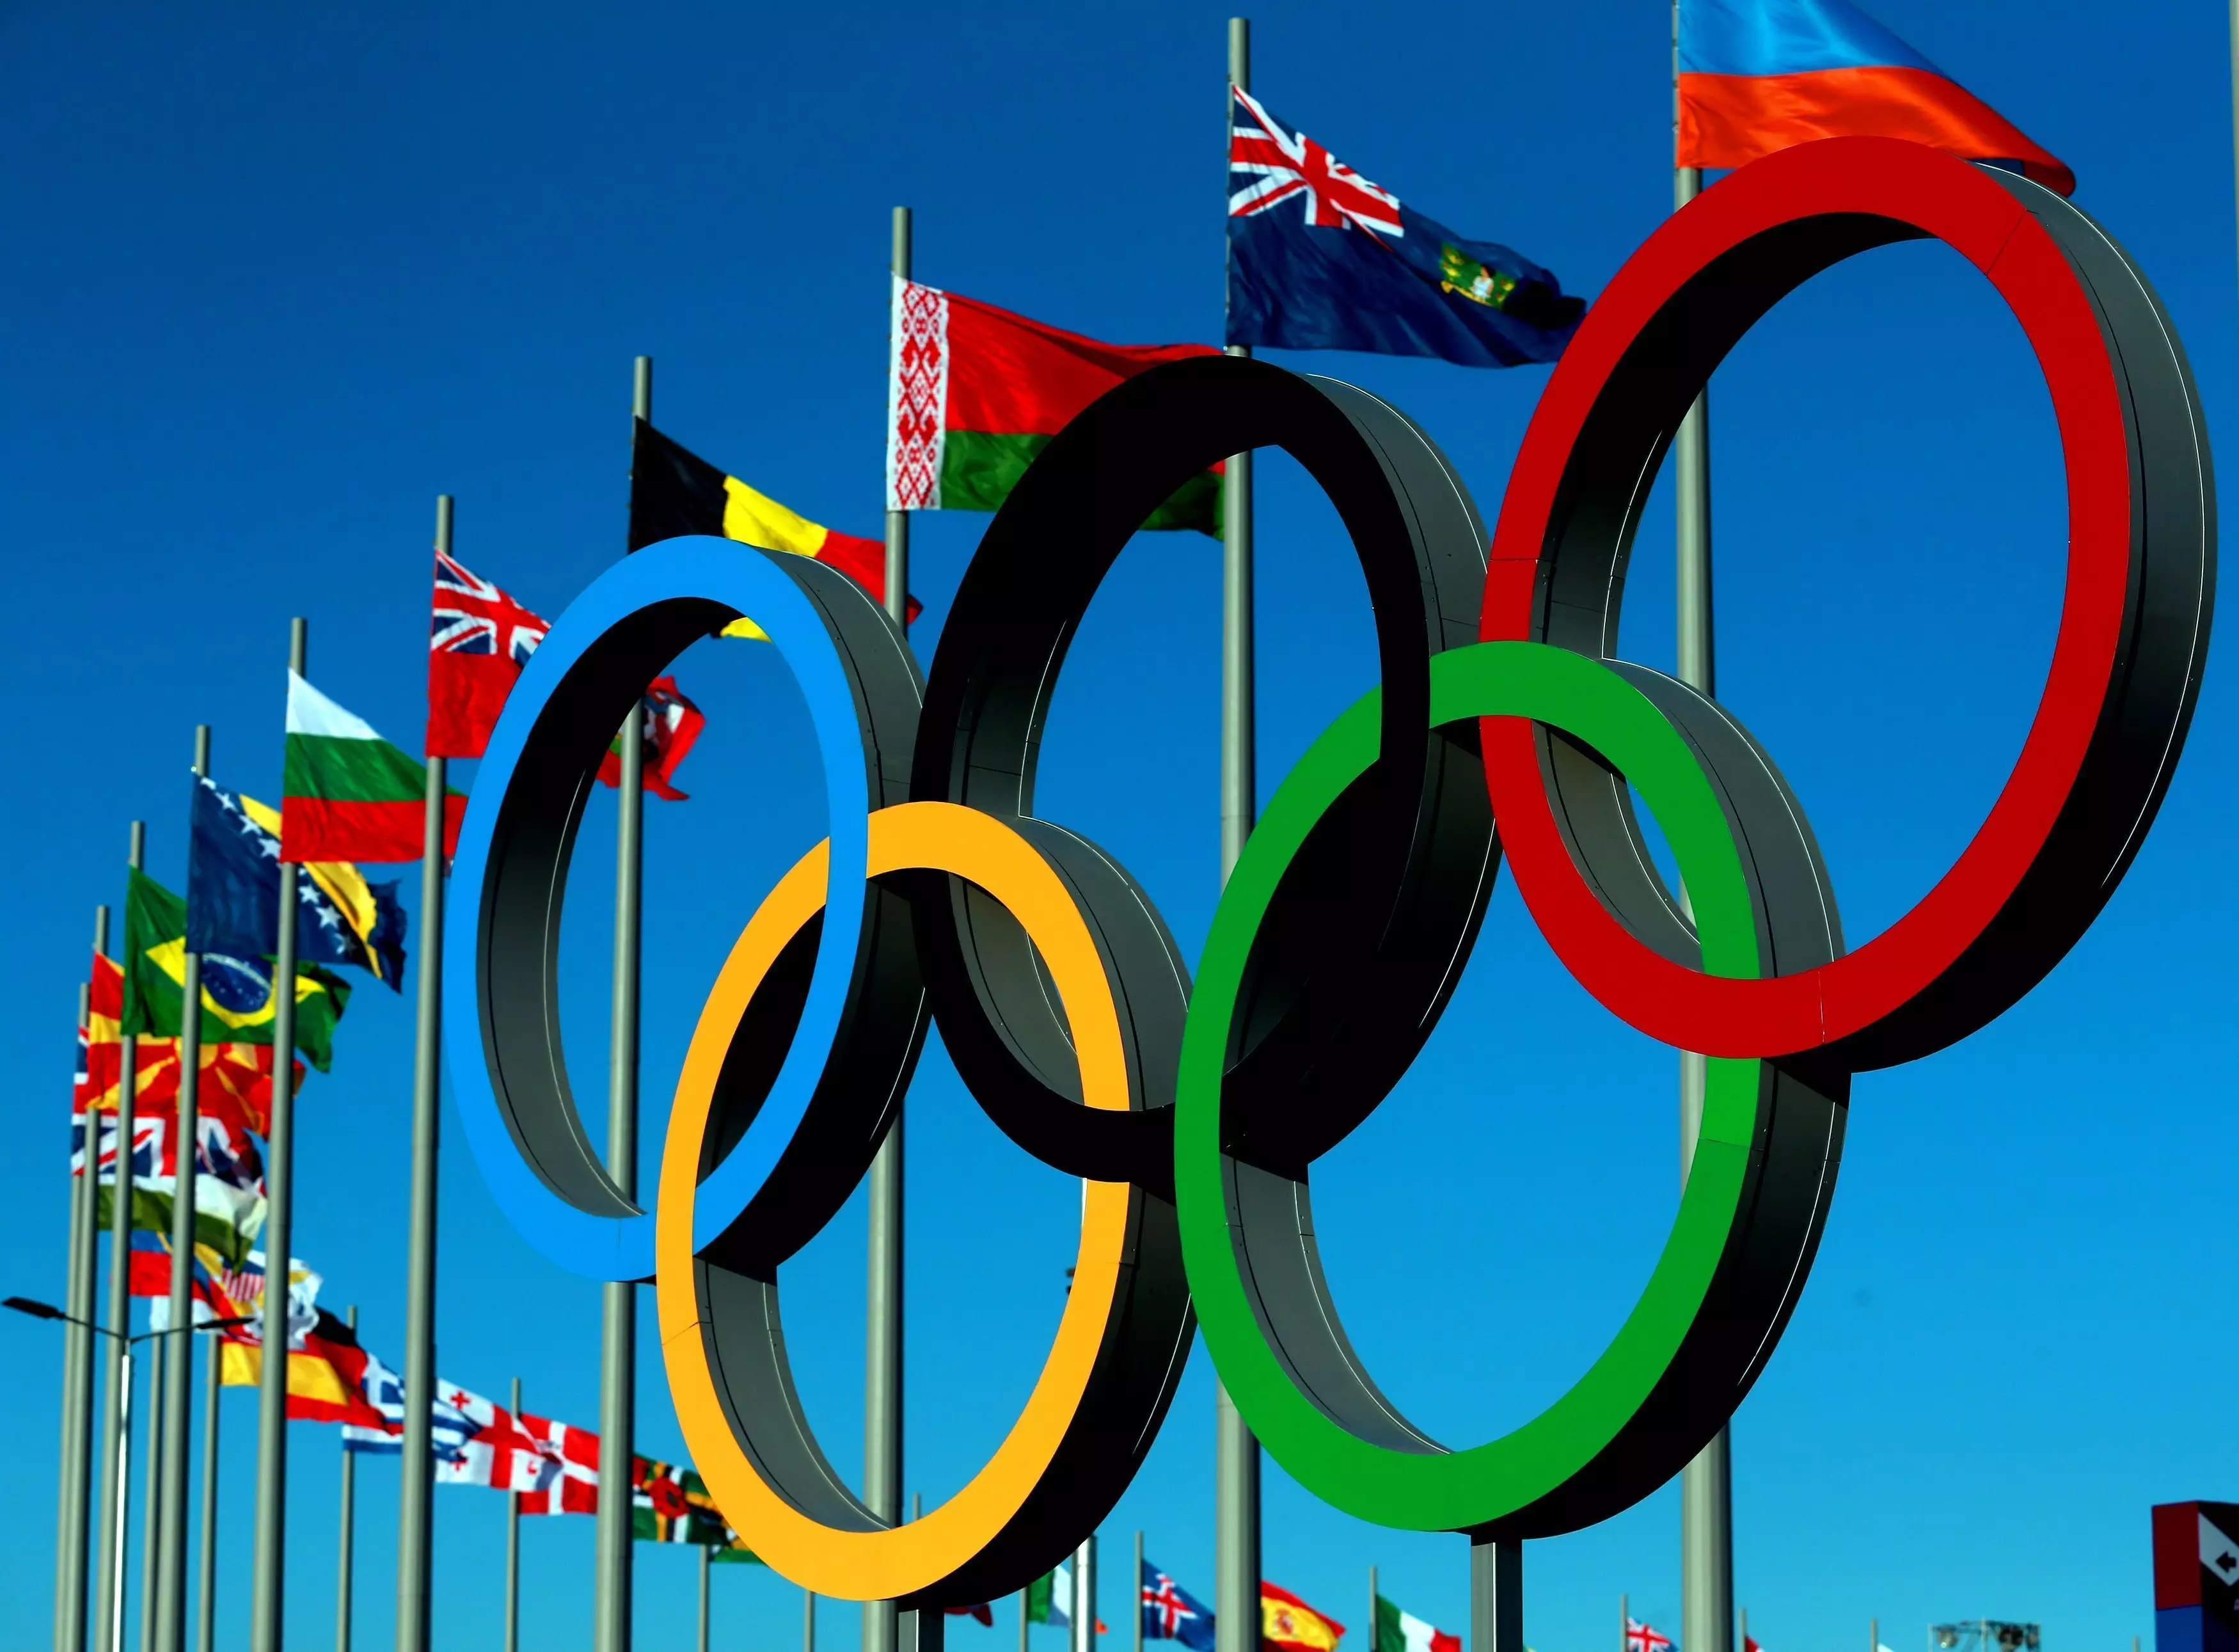 QUIZ: Can You Name All Of The Host Cities For The Summer Olympics?